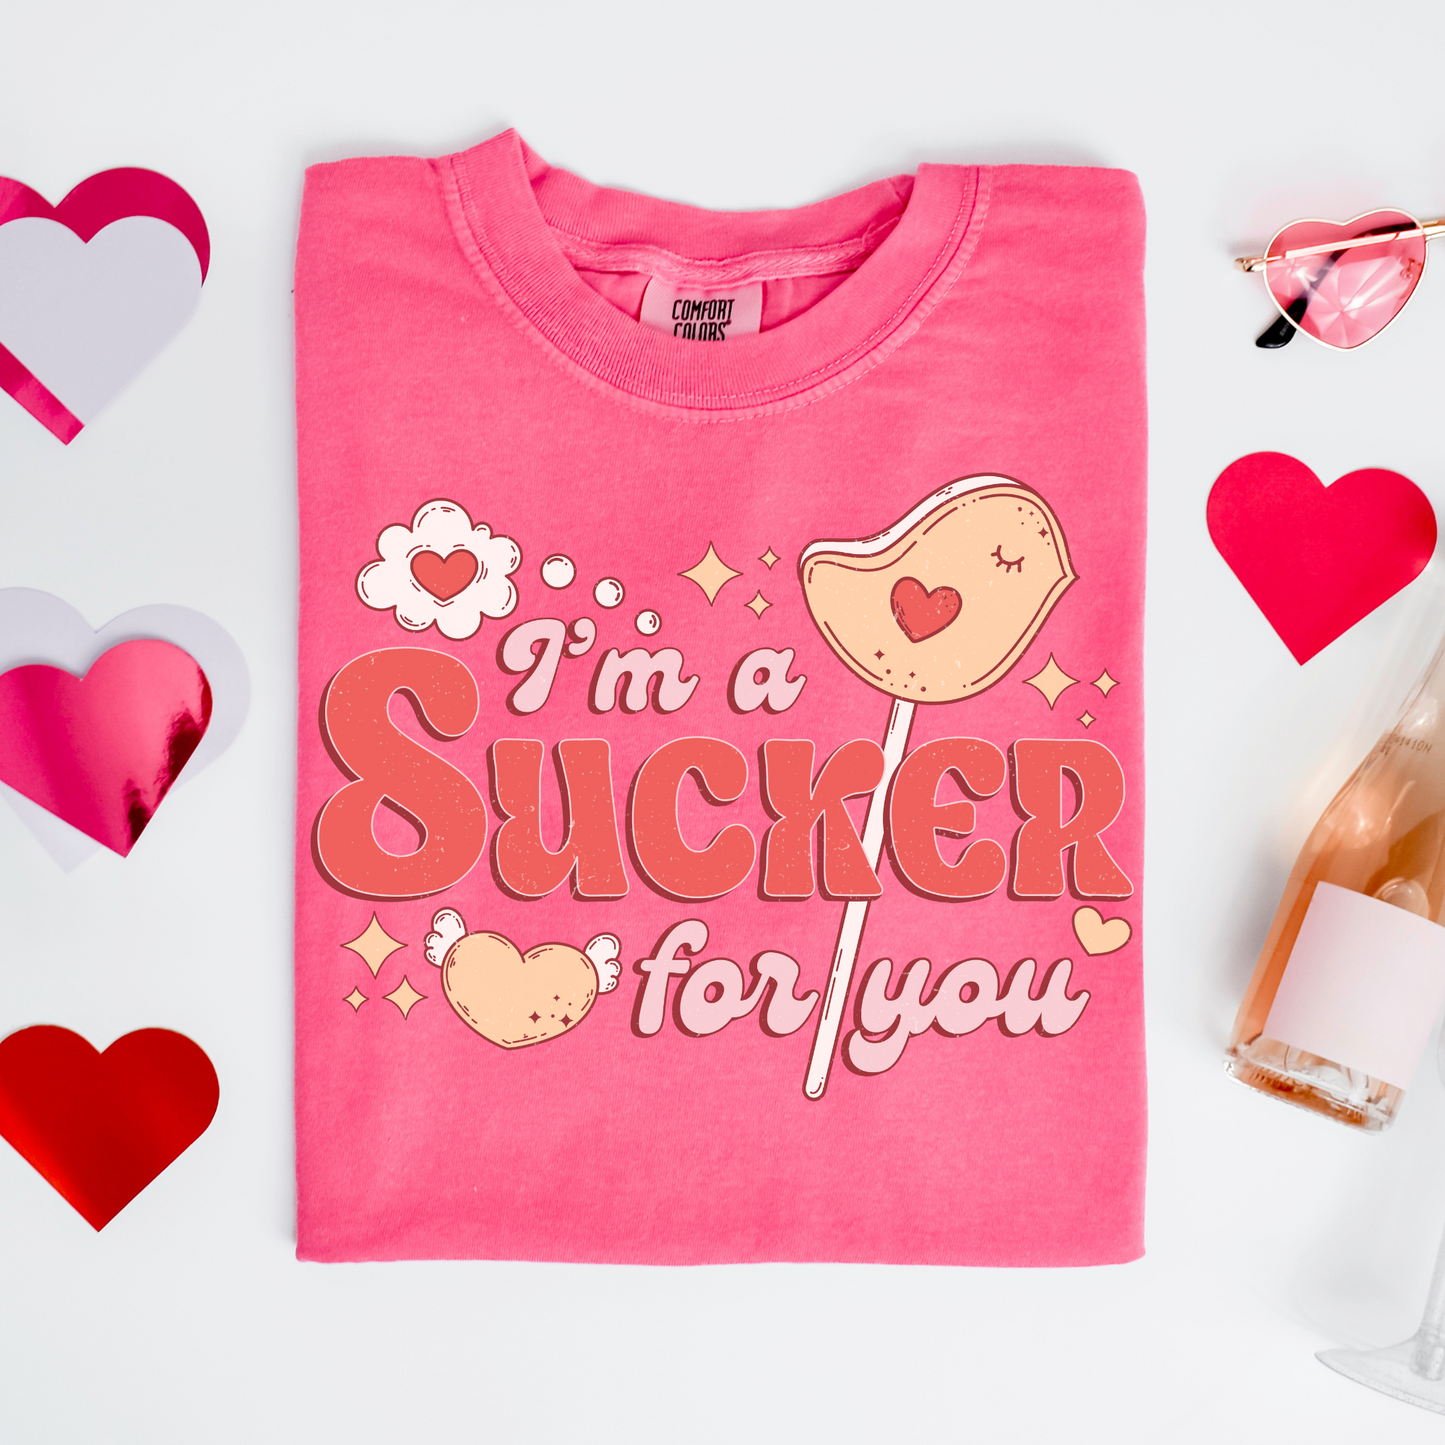 a pink t - shirt that says i'm a sucker for you